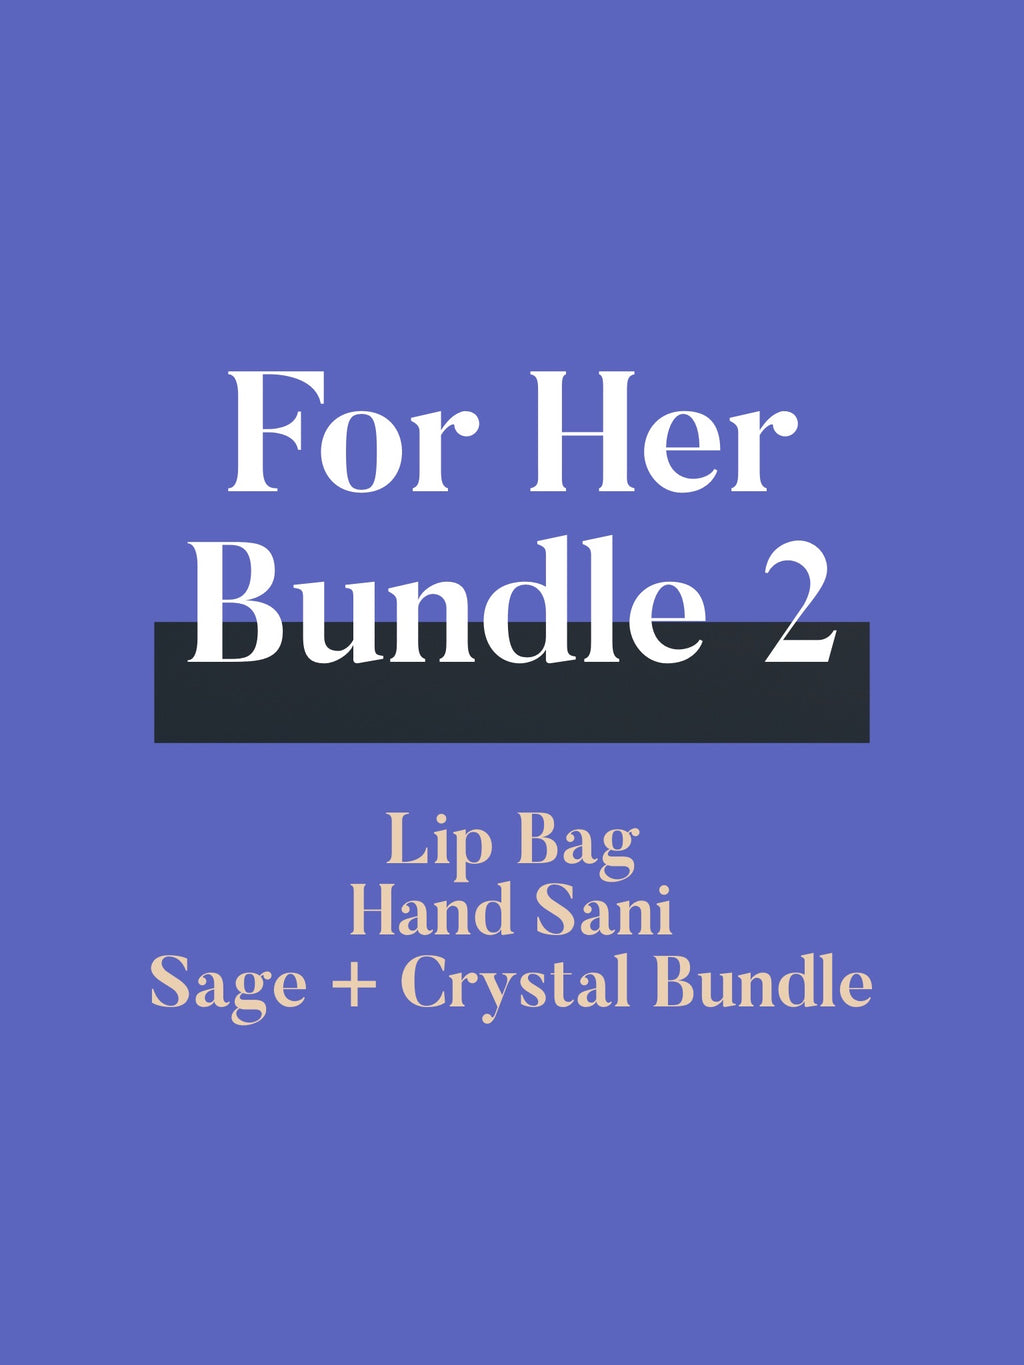 For Her Bundle 2